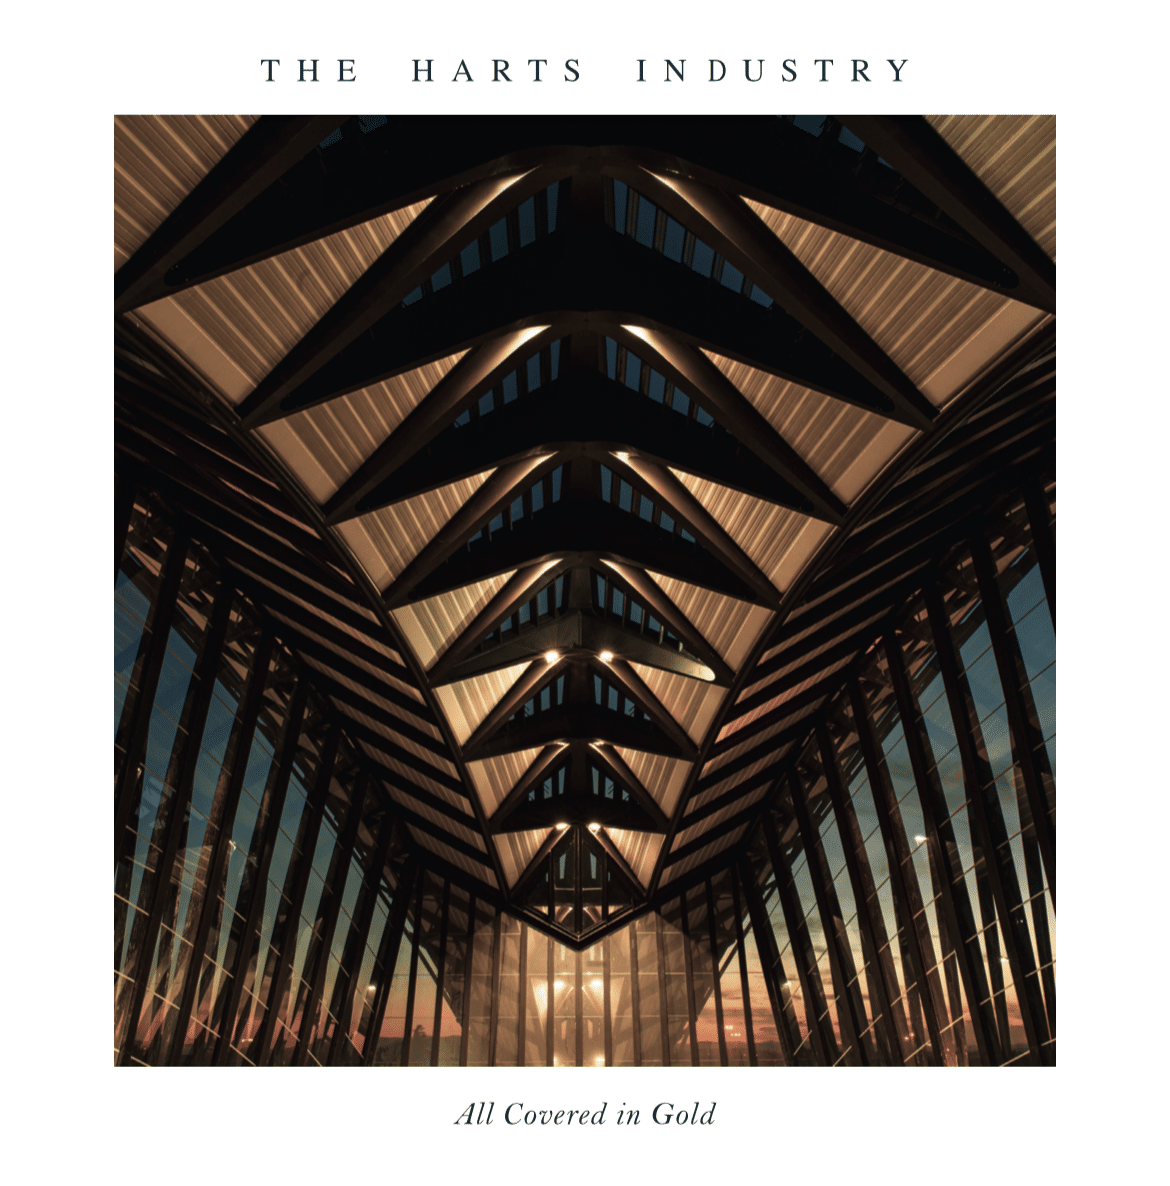 THE HARTS INDUSTRY - All Covered In Gold